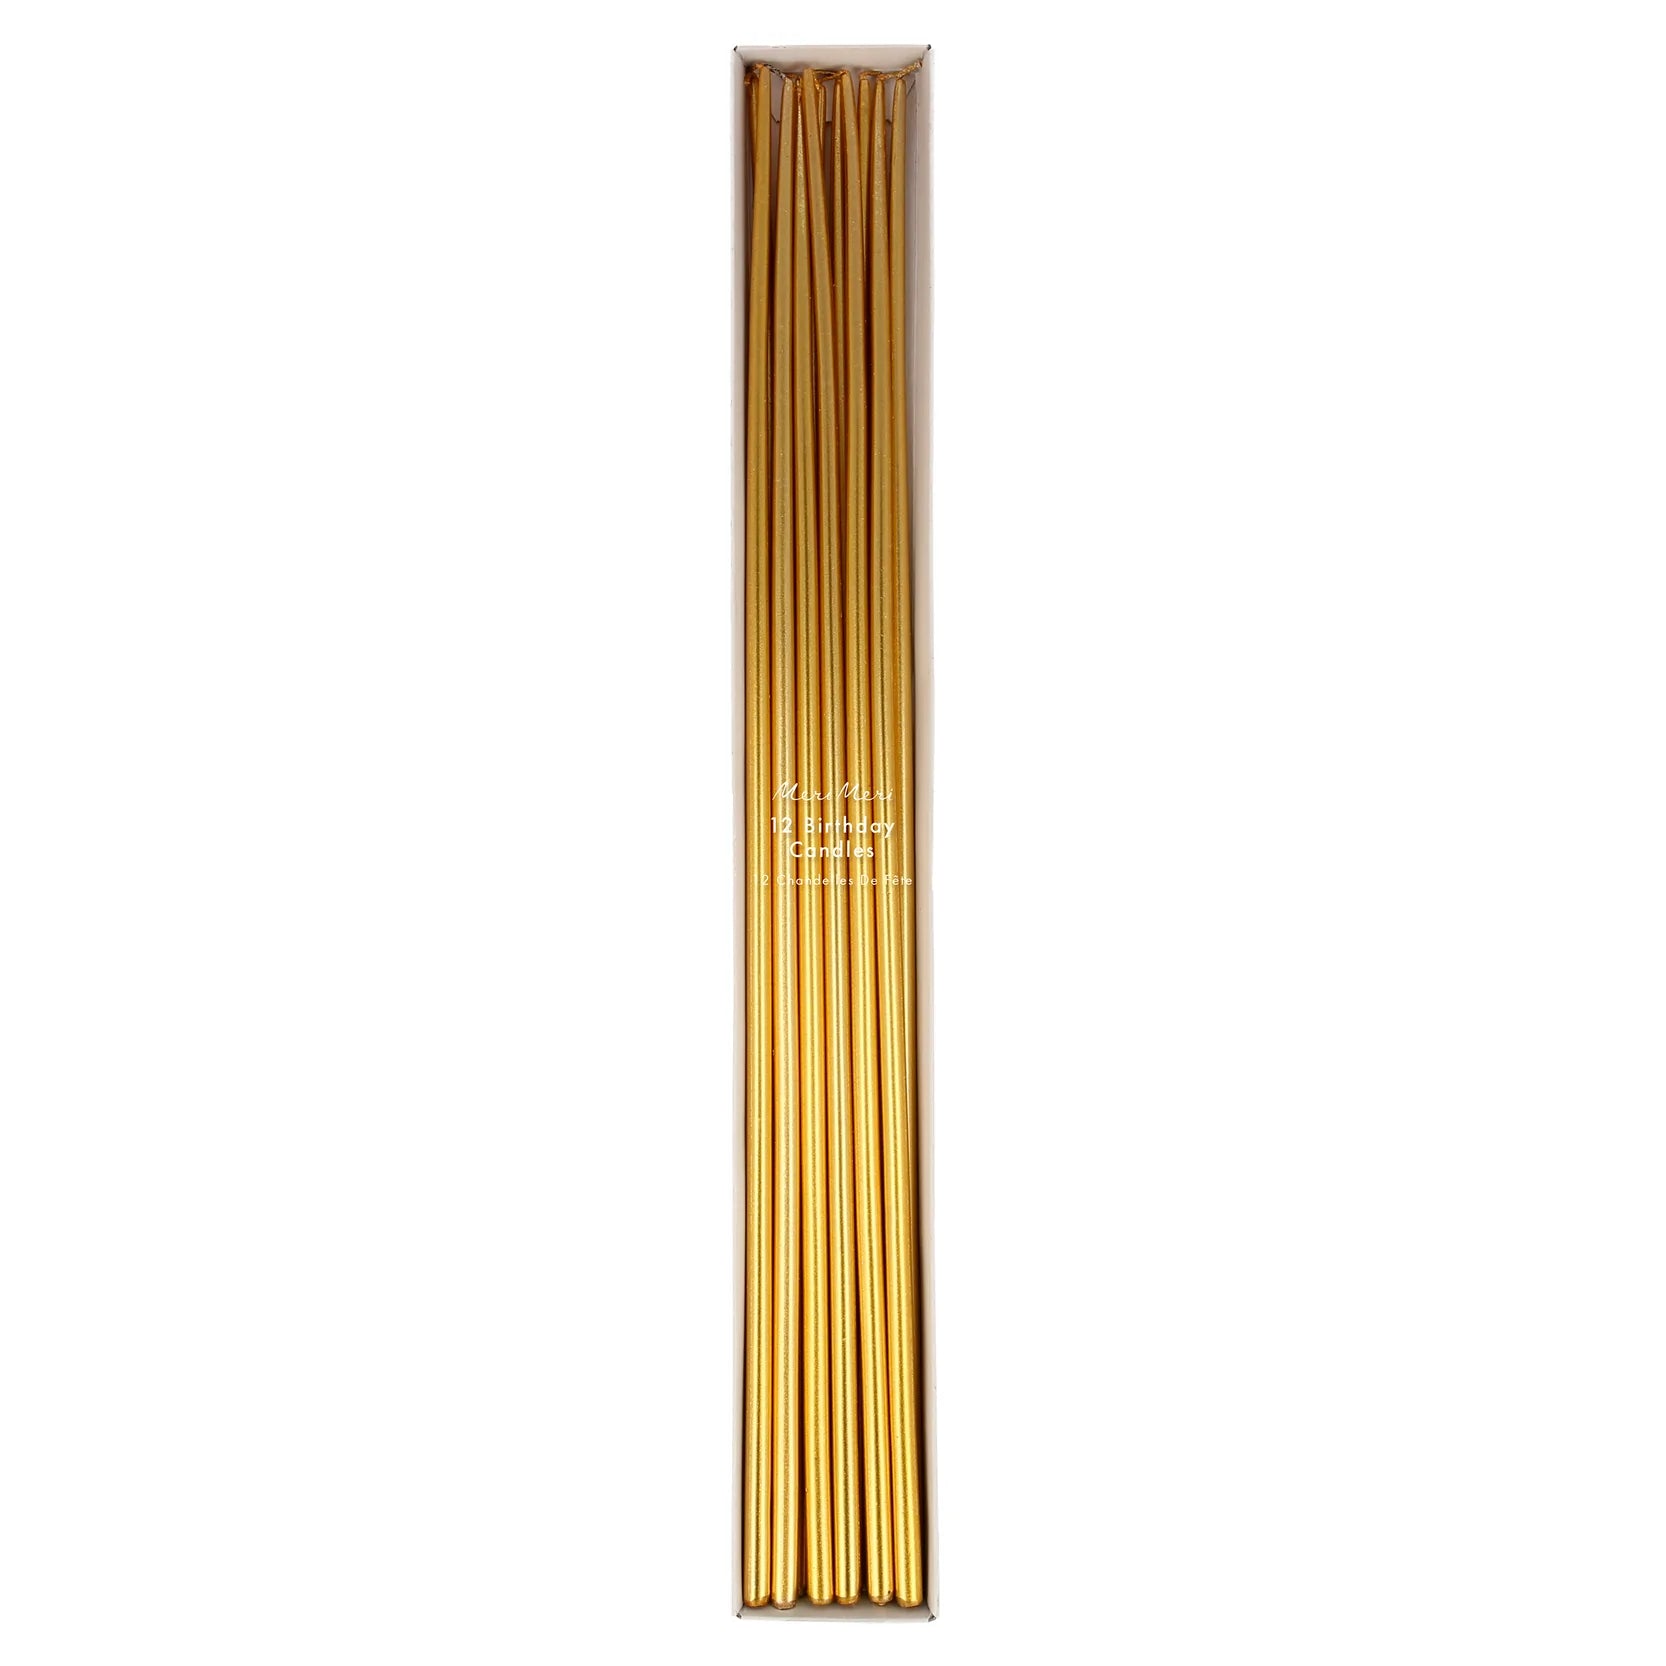 SUPER TALL GOLD CAKE CANDLES